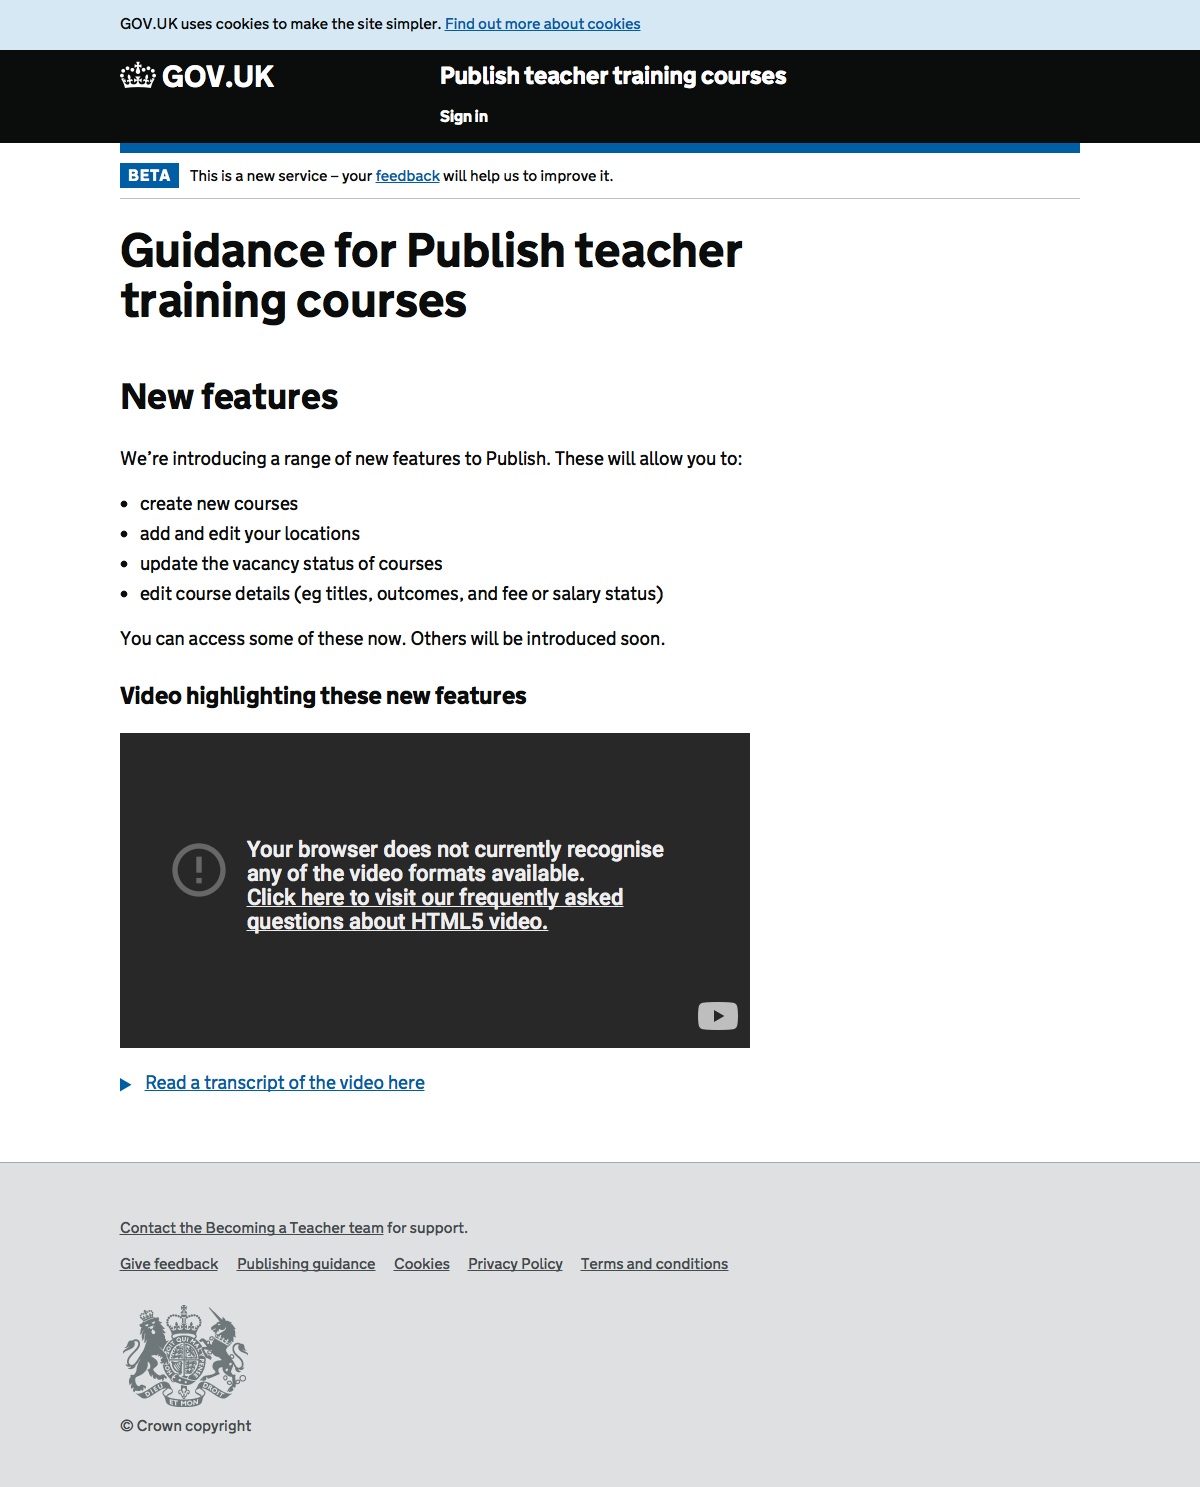 Guidance page with video.